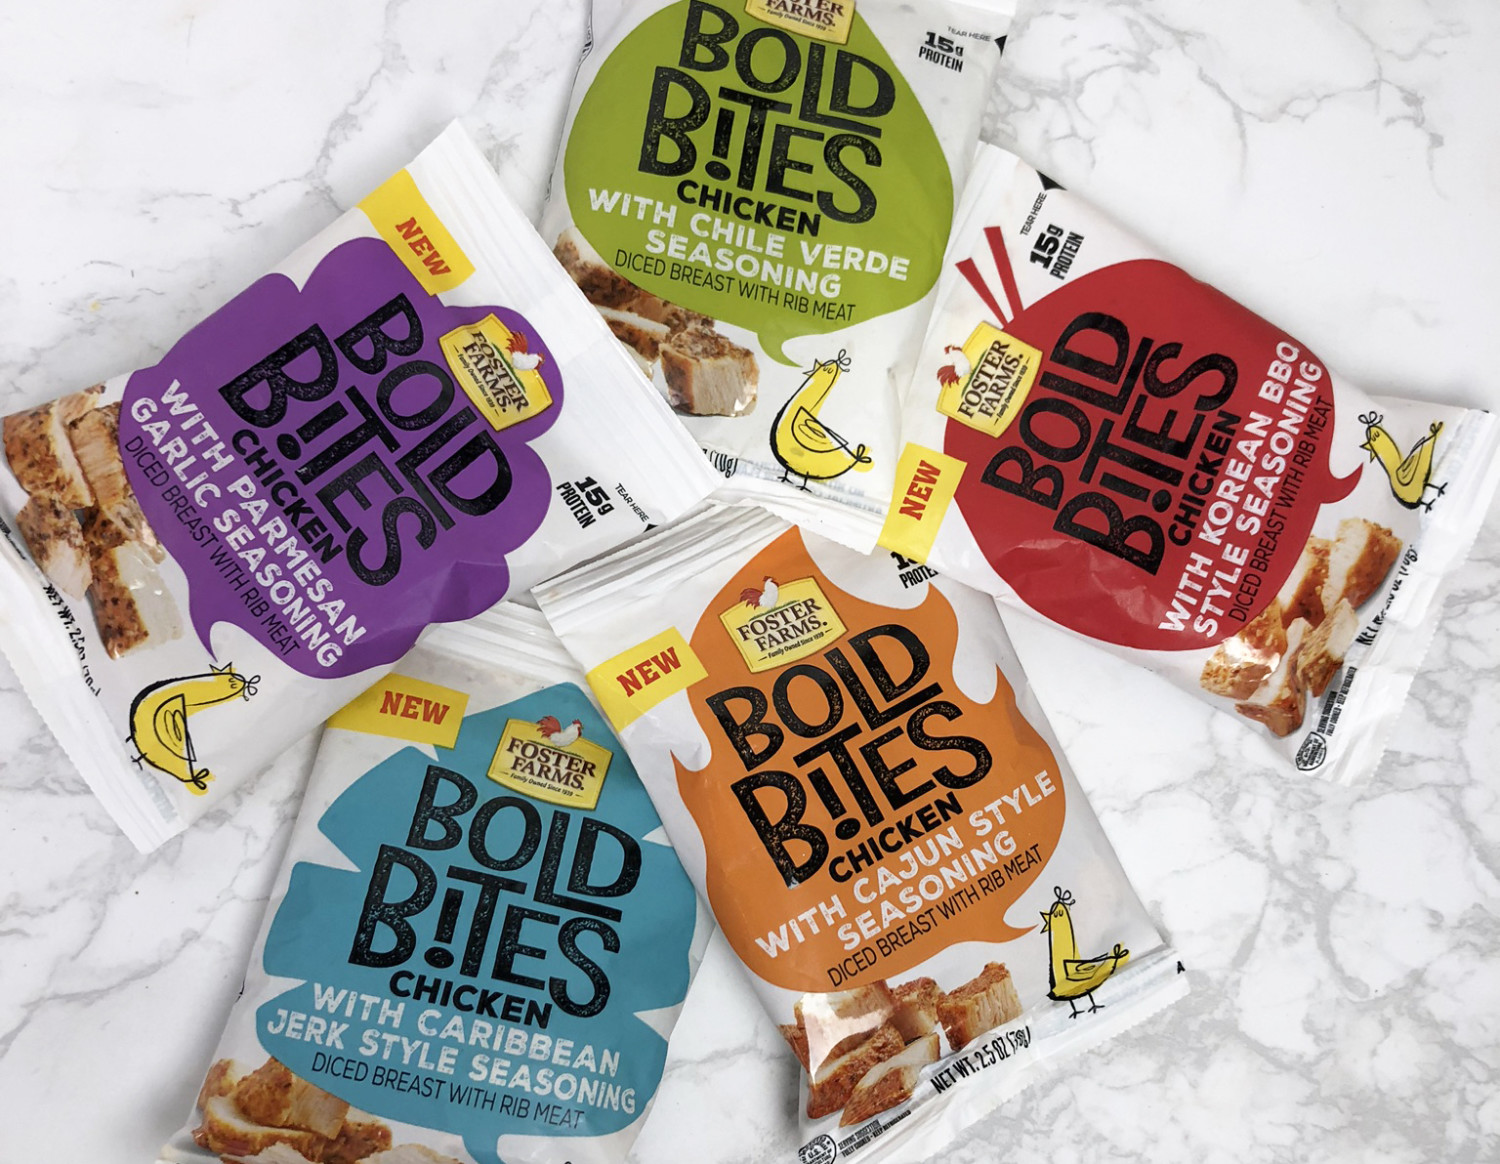 Foster Farms Now Has Bold Bites For Your Eating Convenience